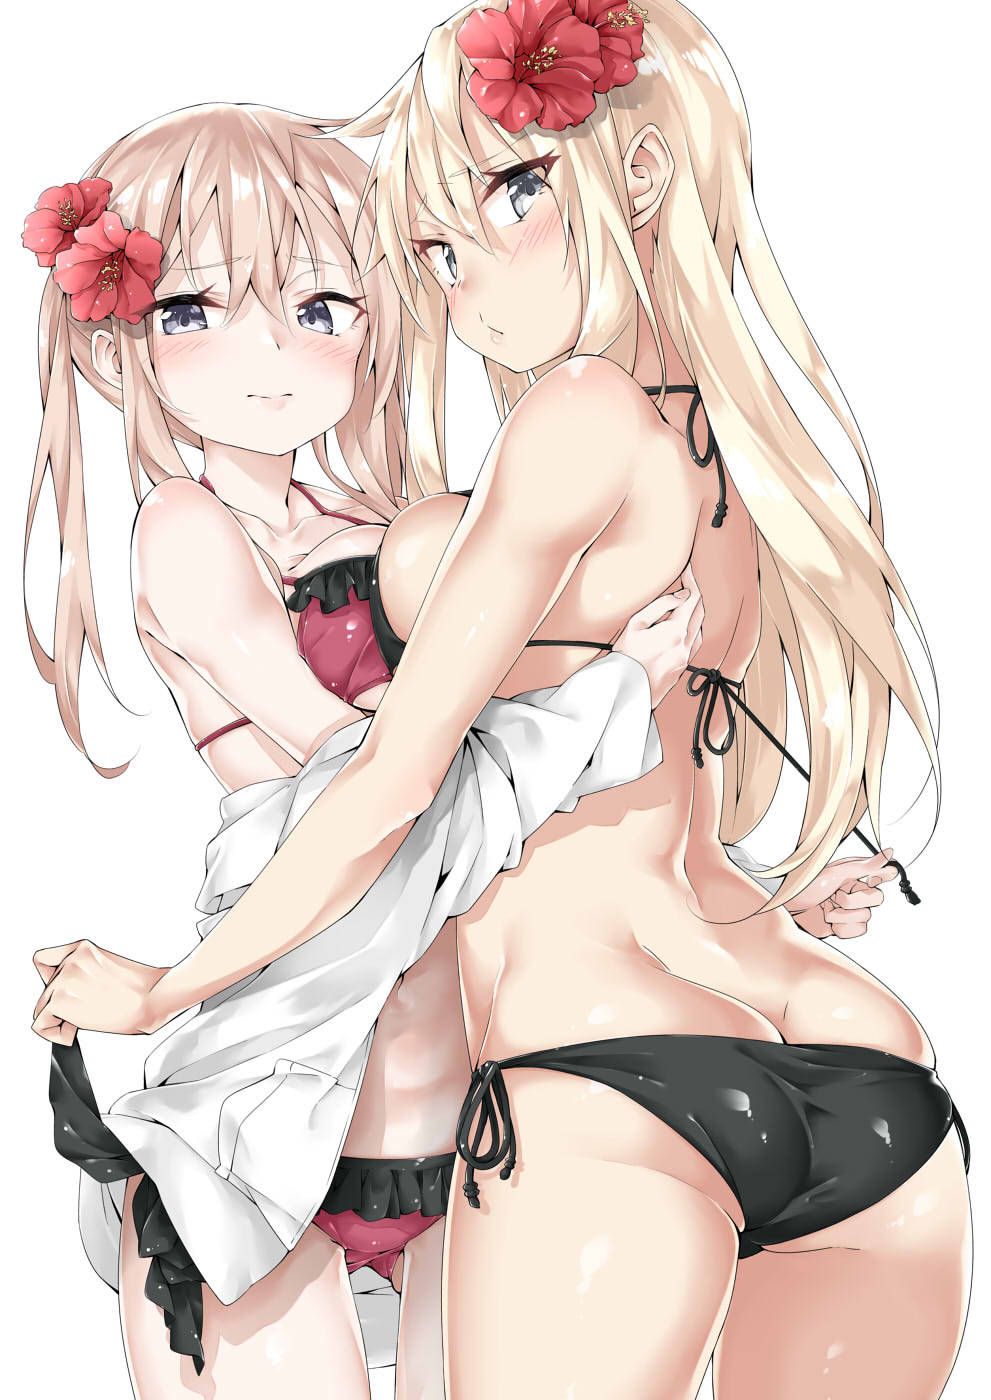 Corner wwwwwwwww excited by erotic illustrations of [ship this] after a long interval 13